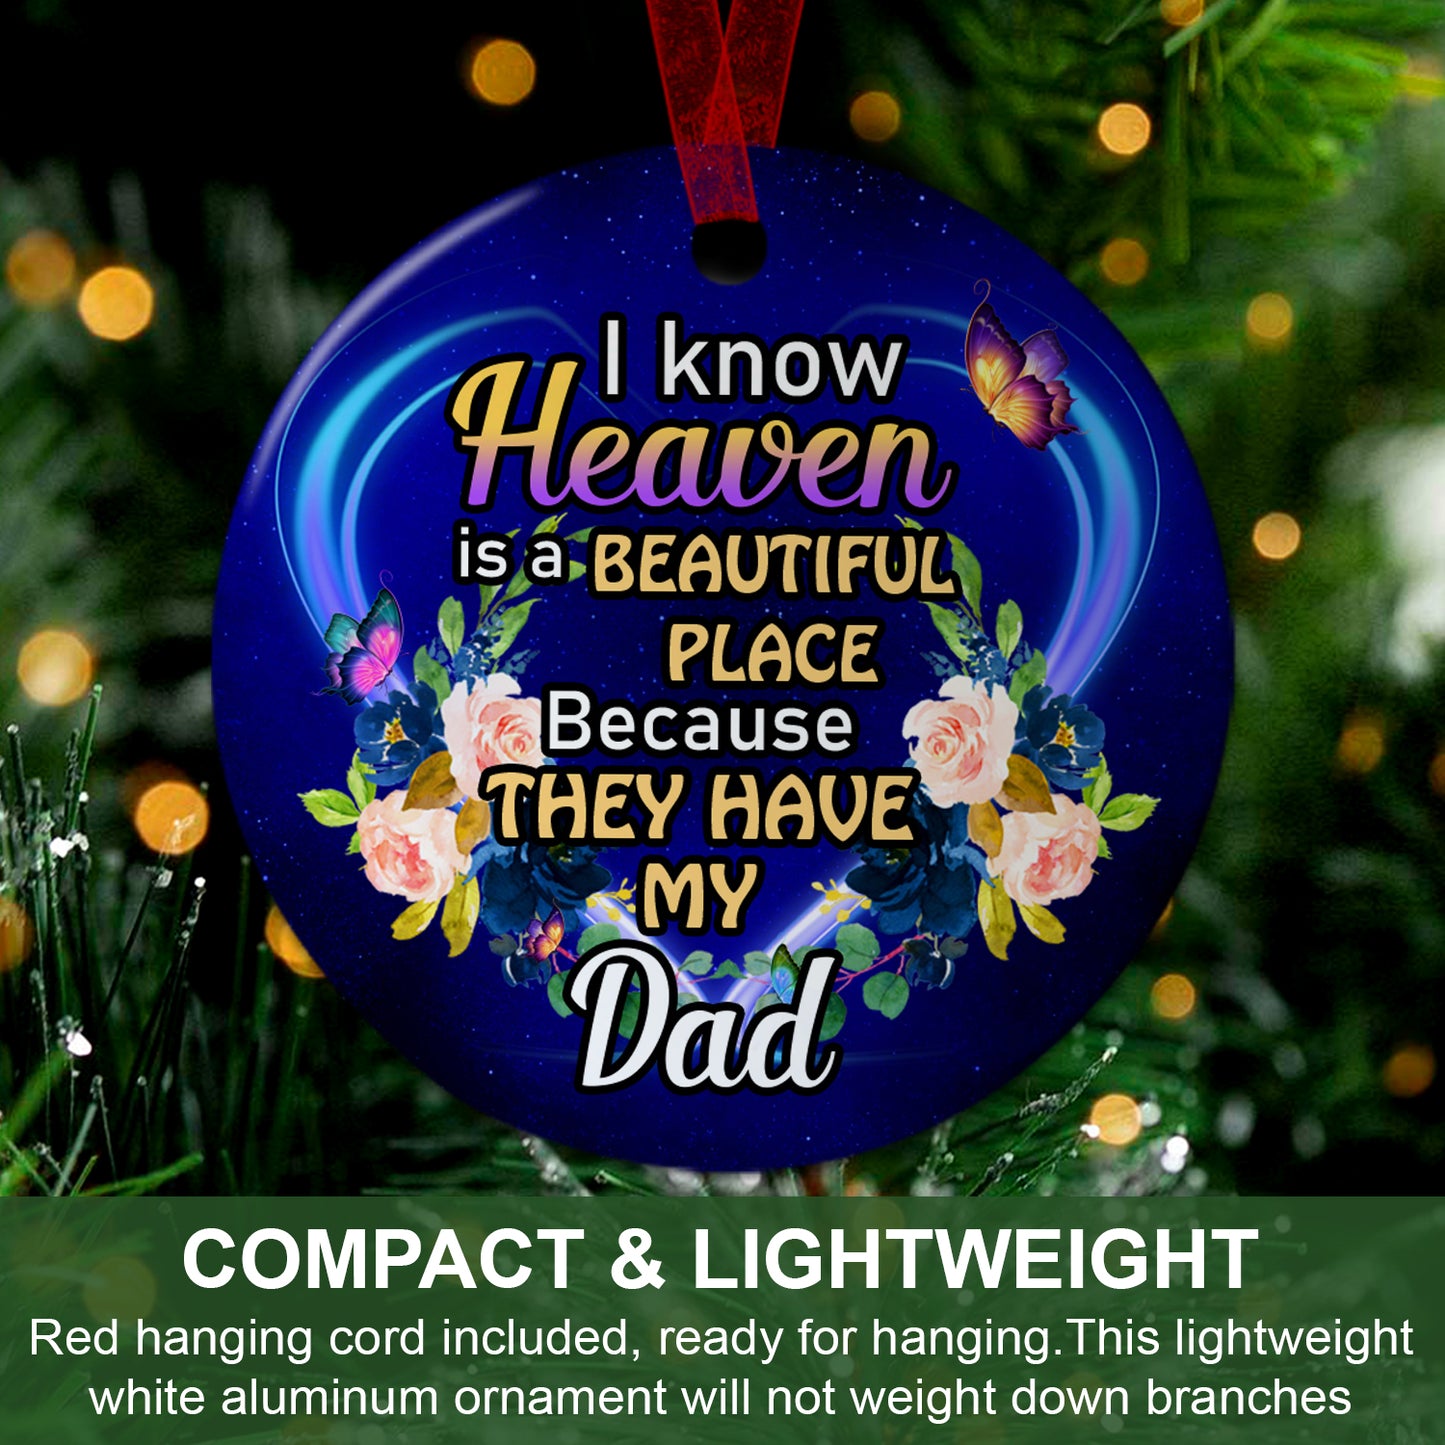 Dad Memorial Ornament I Know Heaven Is A Beautiful Place Because They Have My Dad Ornament Sympathy Keepsake Gift For Loss Of Dad - Aluminum Metal Ornament